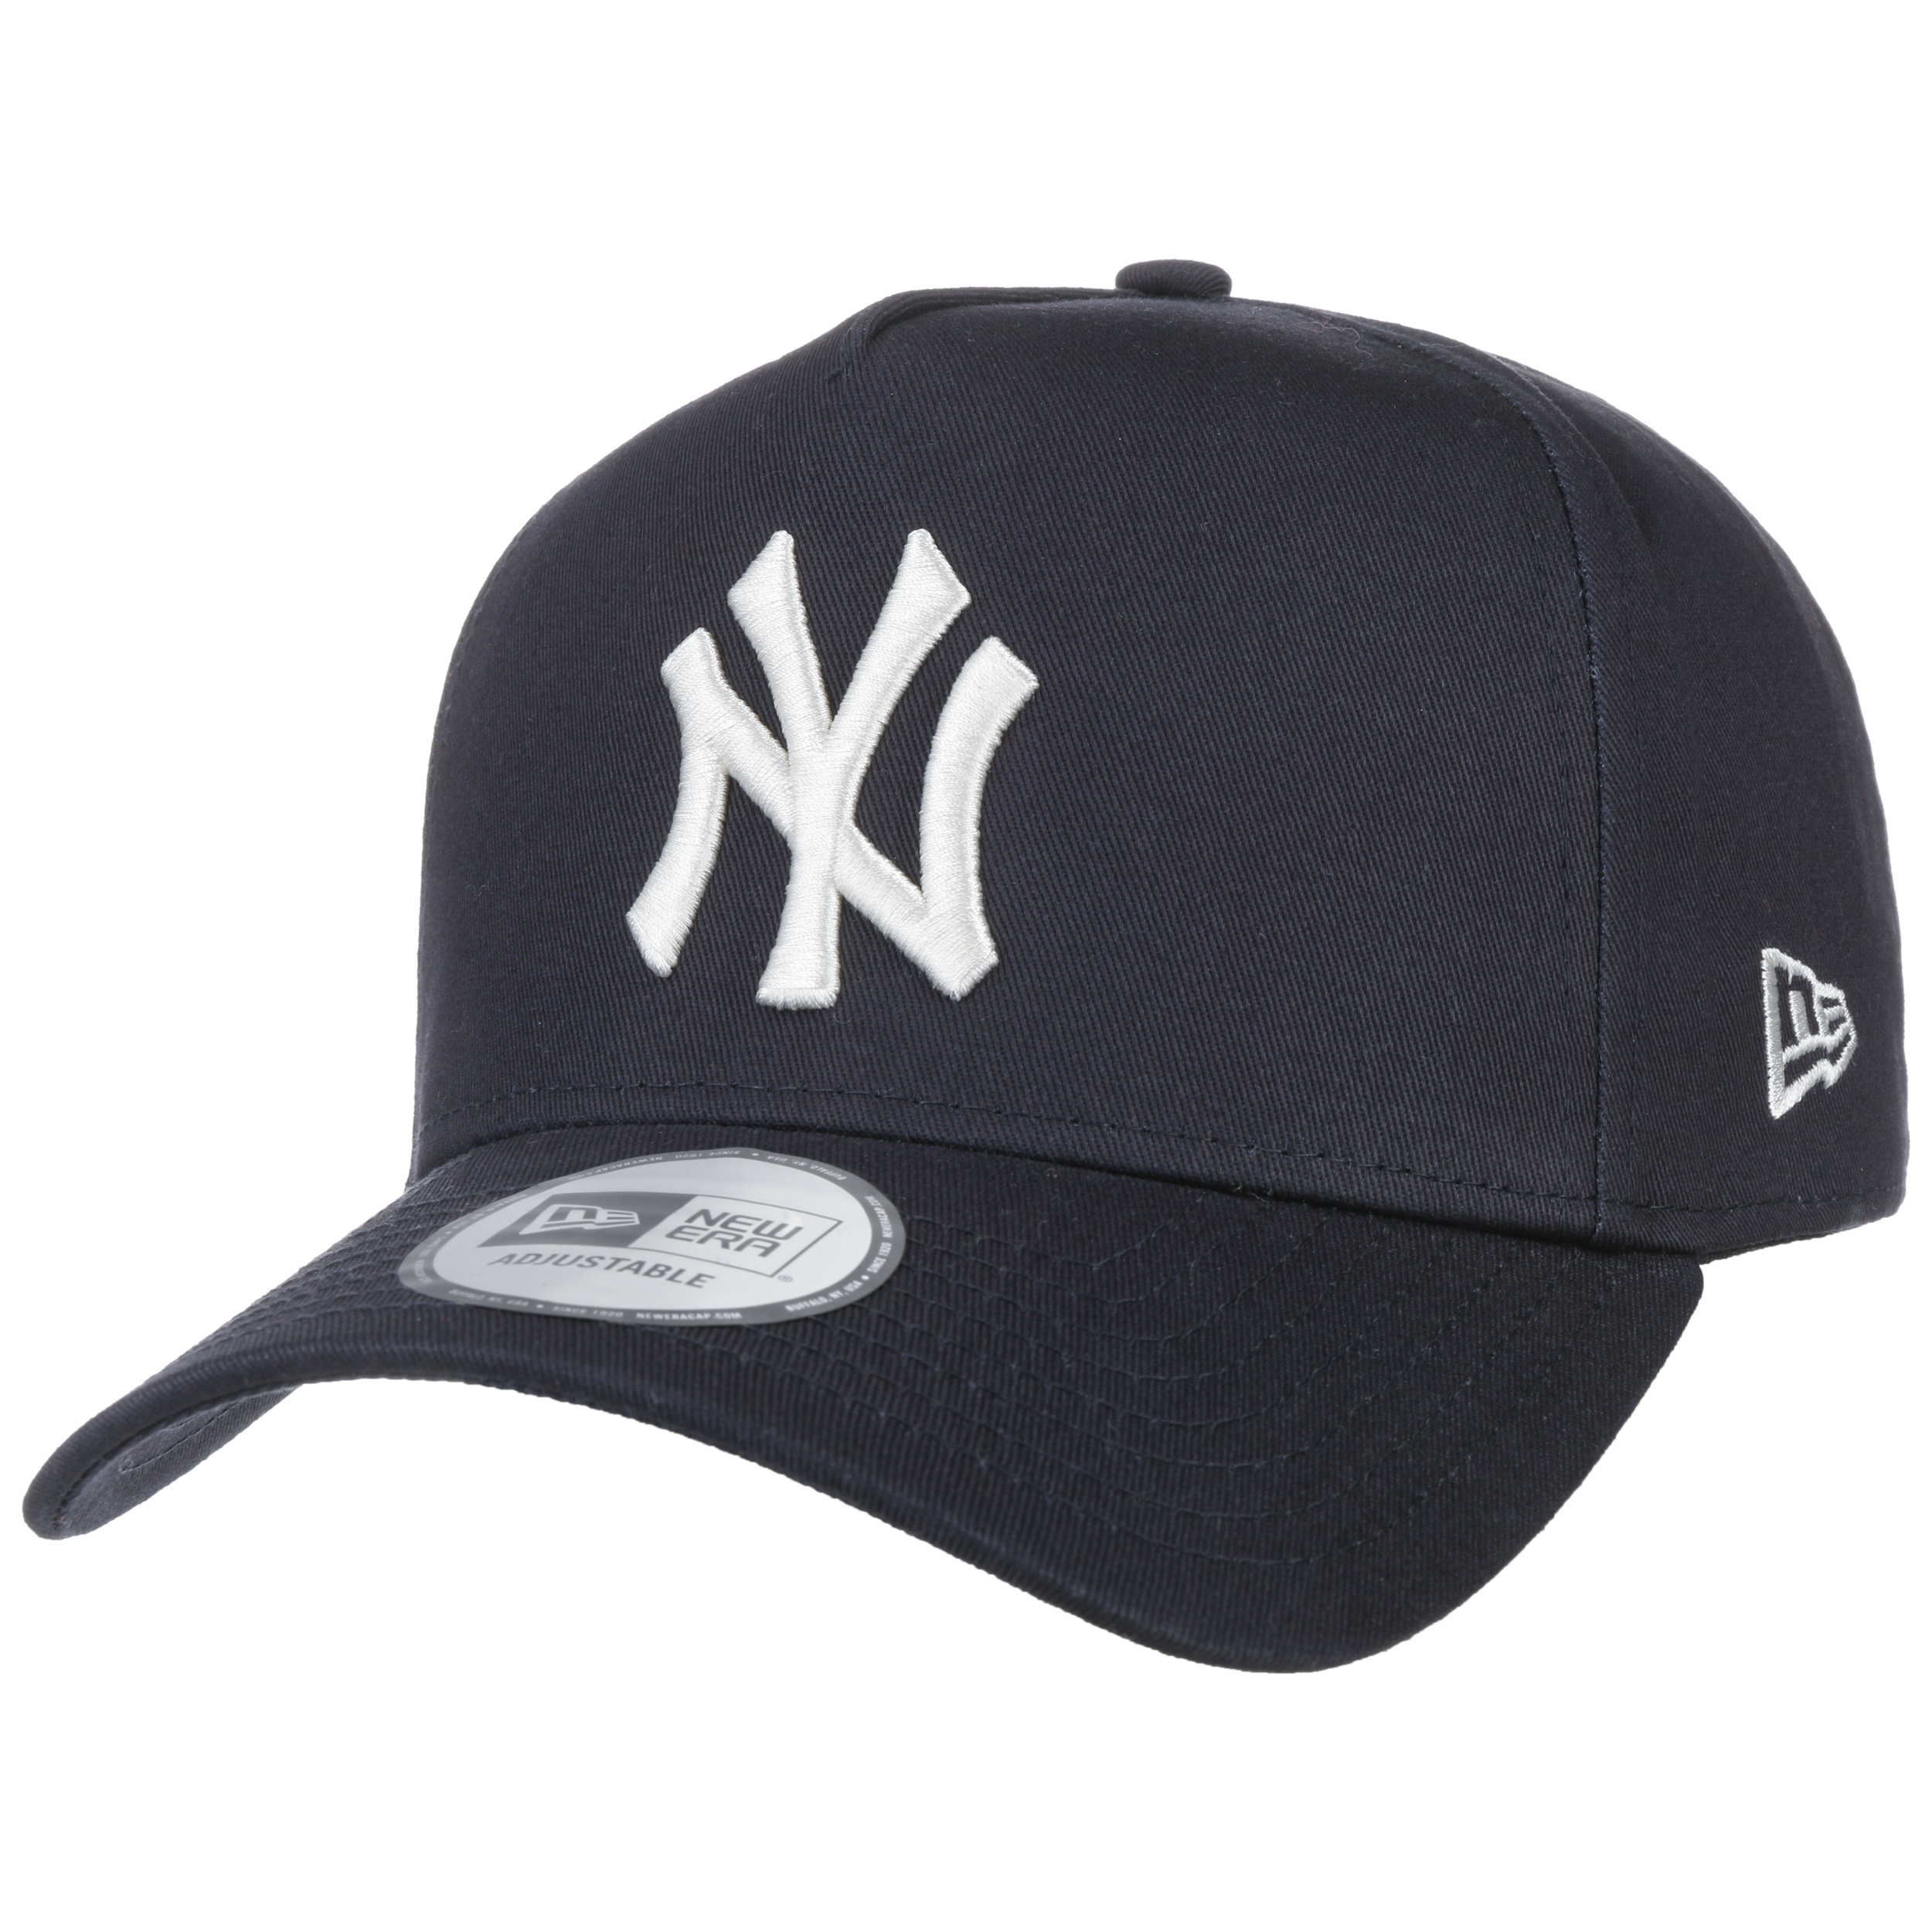 Cap Era 29,95 - € 9Forty New by Ess A-Frame Yankees Col